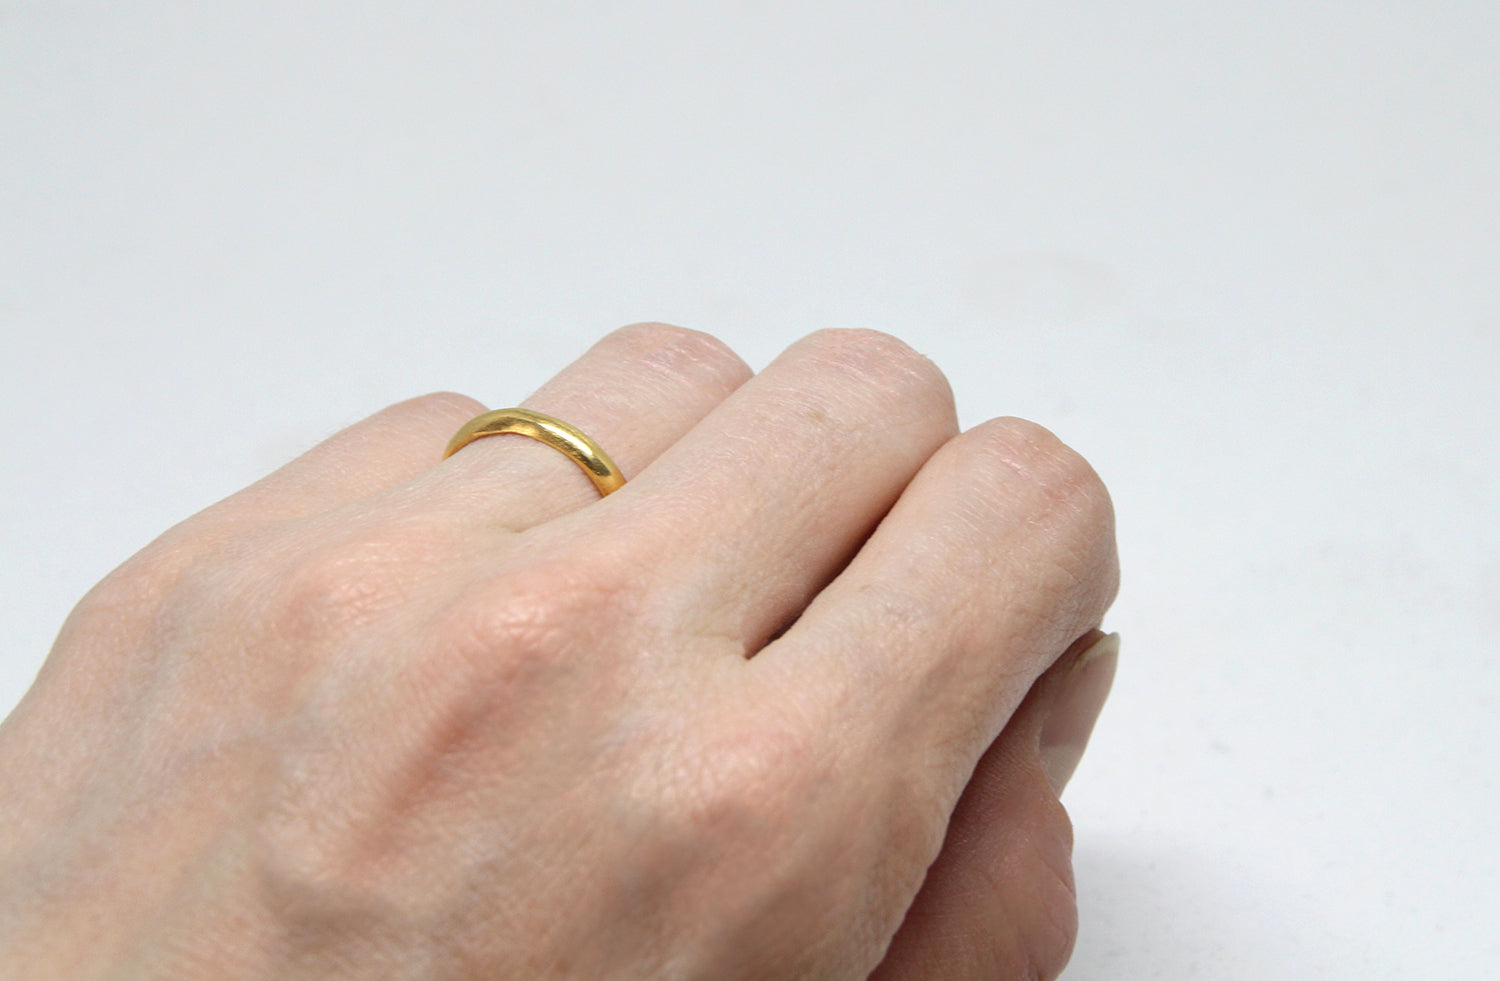 llayers-mens-women-engagement-stackable-gold-band-ring-one001-brooklyn-newyork